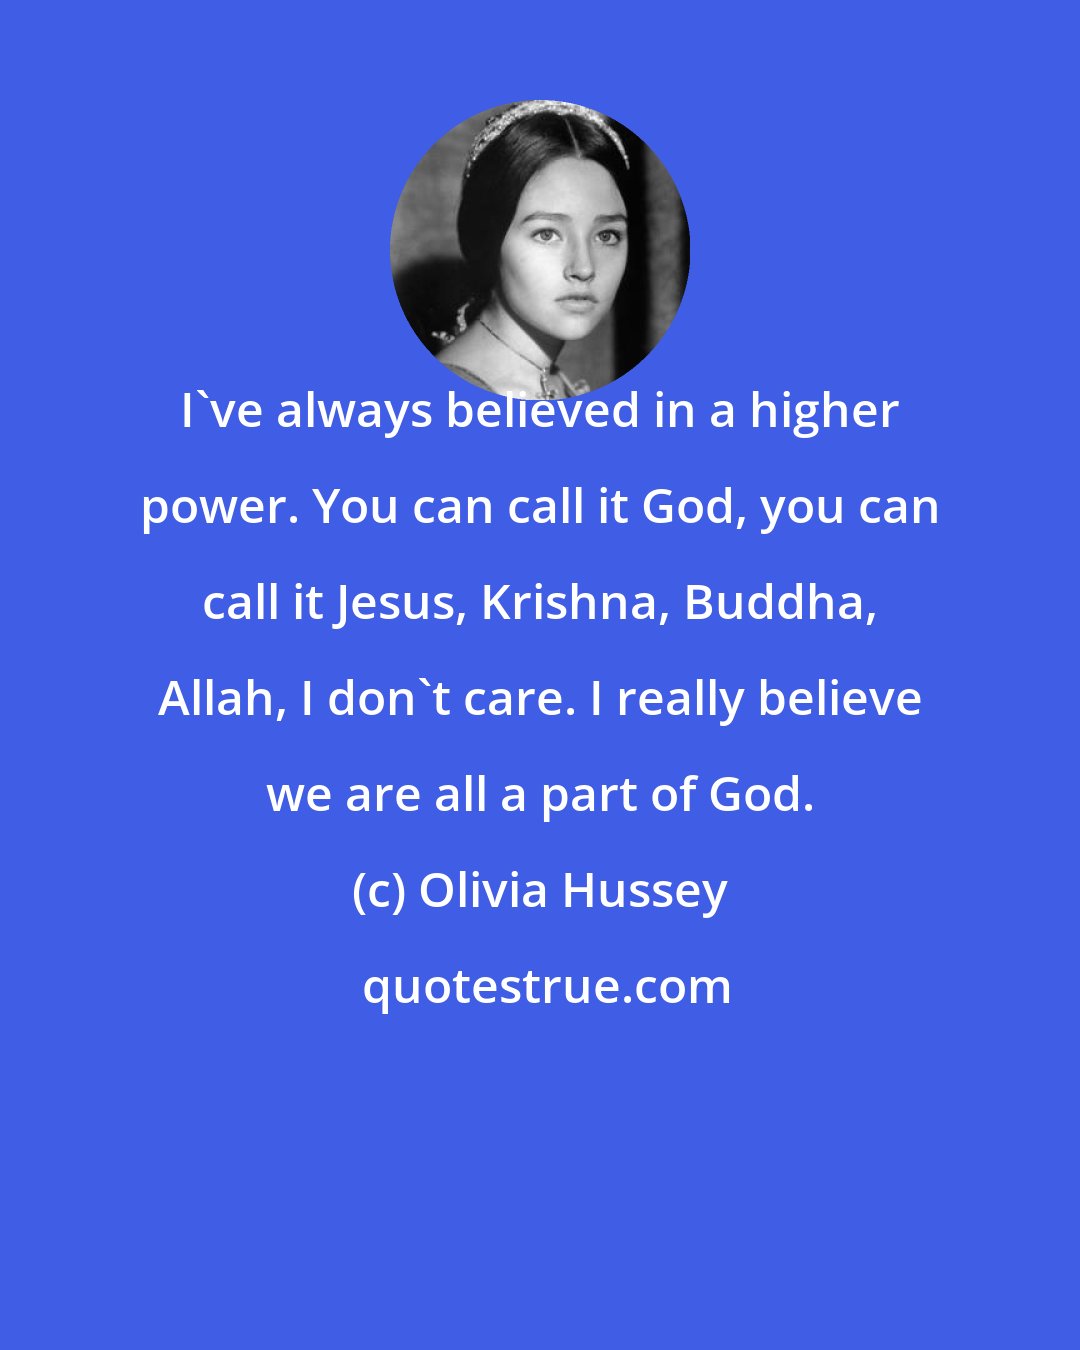 Olivia Hussey: I've always believed in a higher power. You can call it God, you can call it Jesus, Krishna, Buddha, Allah, I don't care. I really believe we are all a part of God.